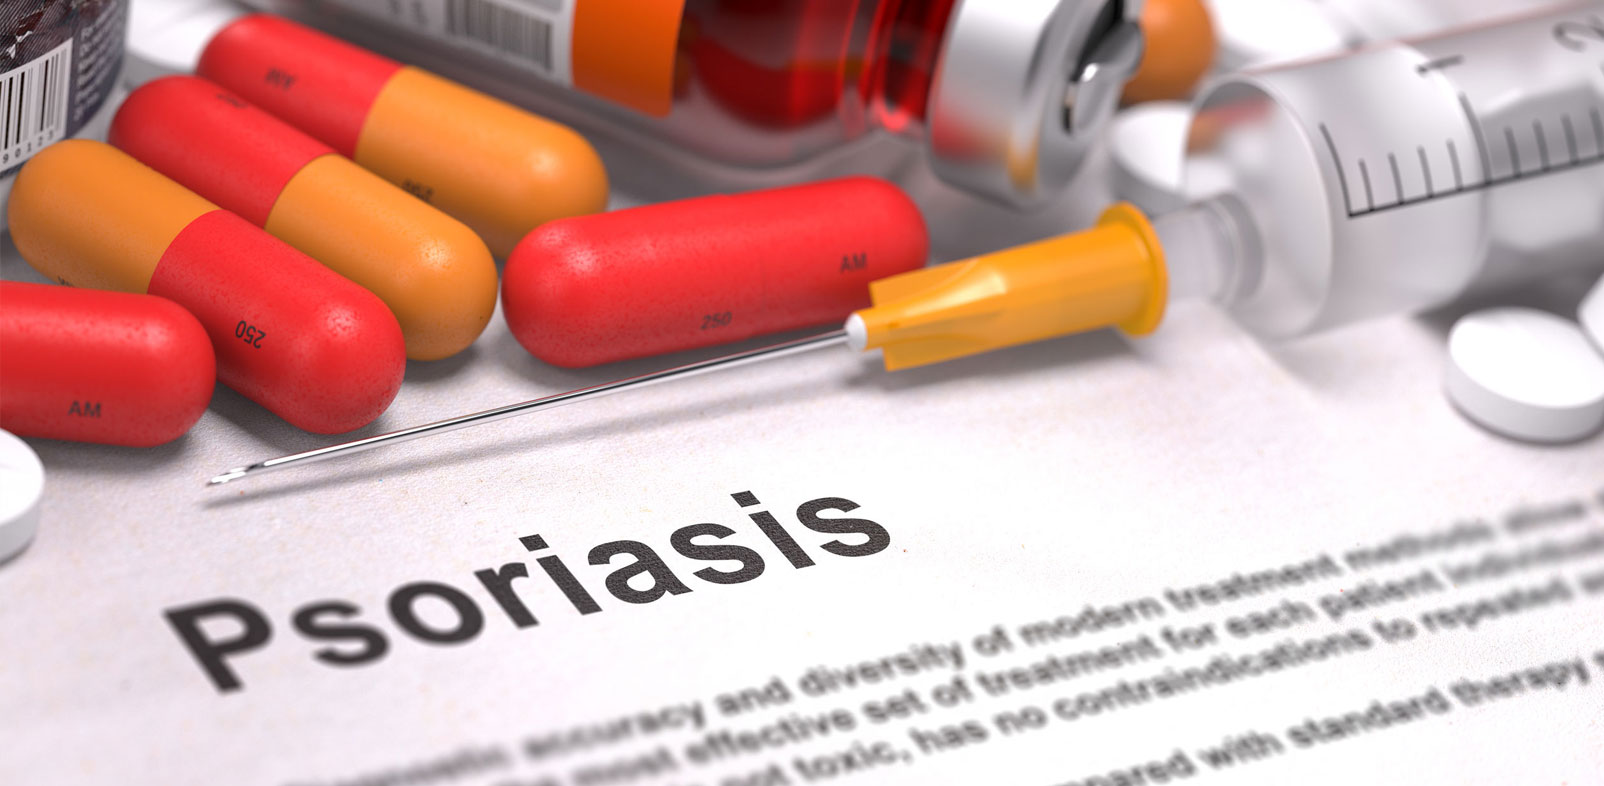 Psoriasis Treatment Is Necessary To Heal the Infected Skin